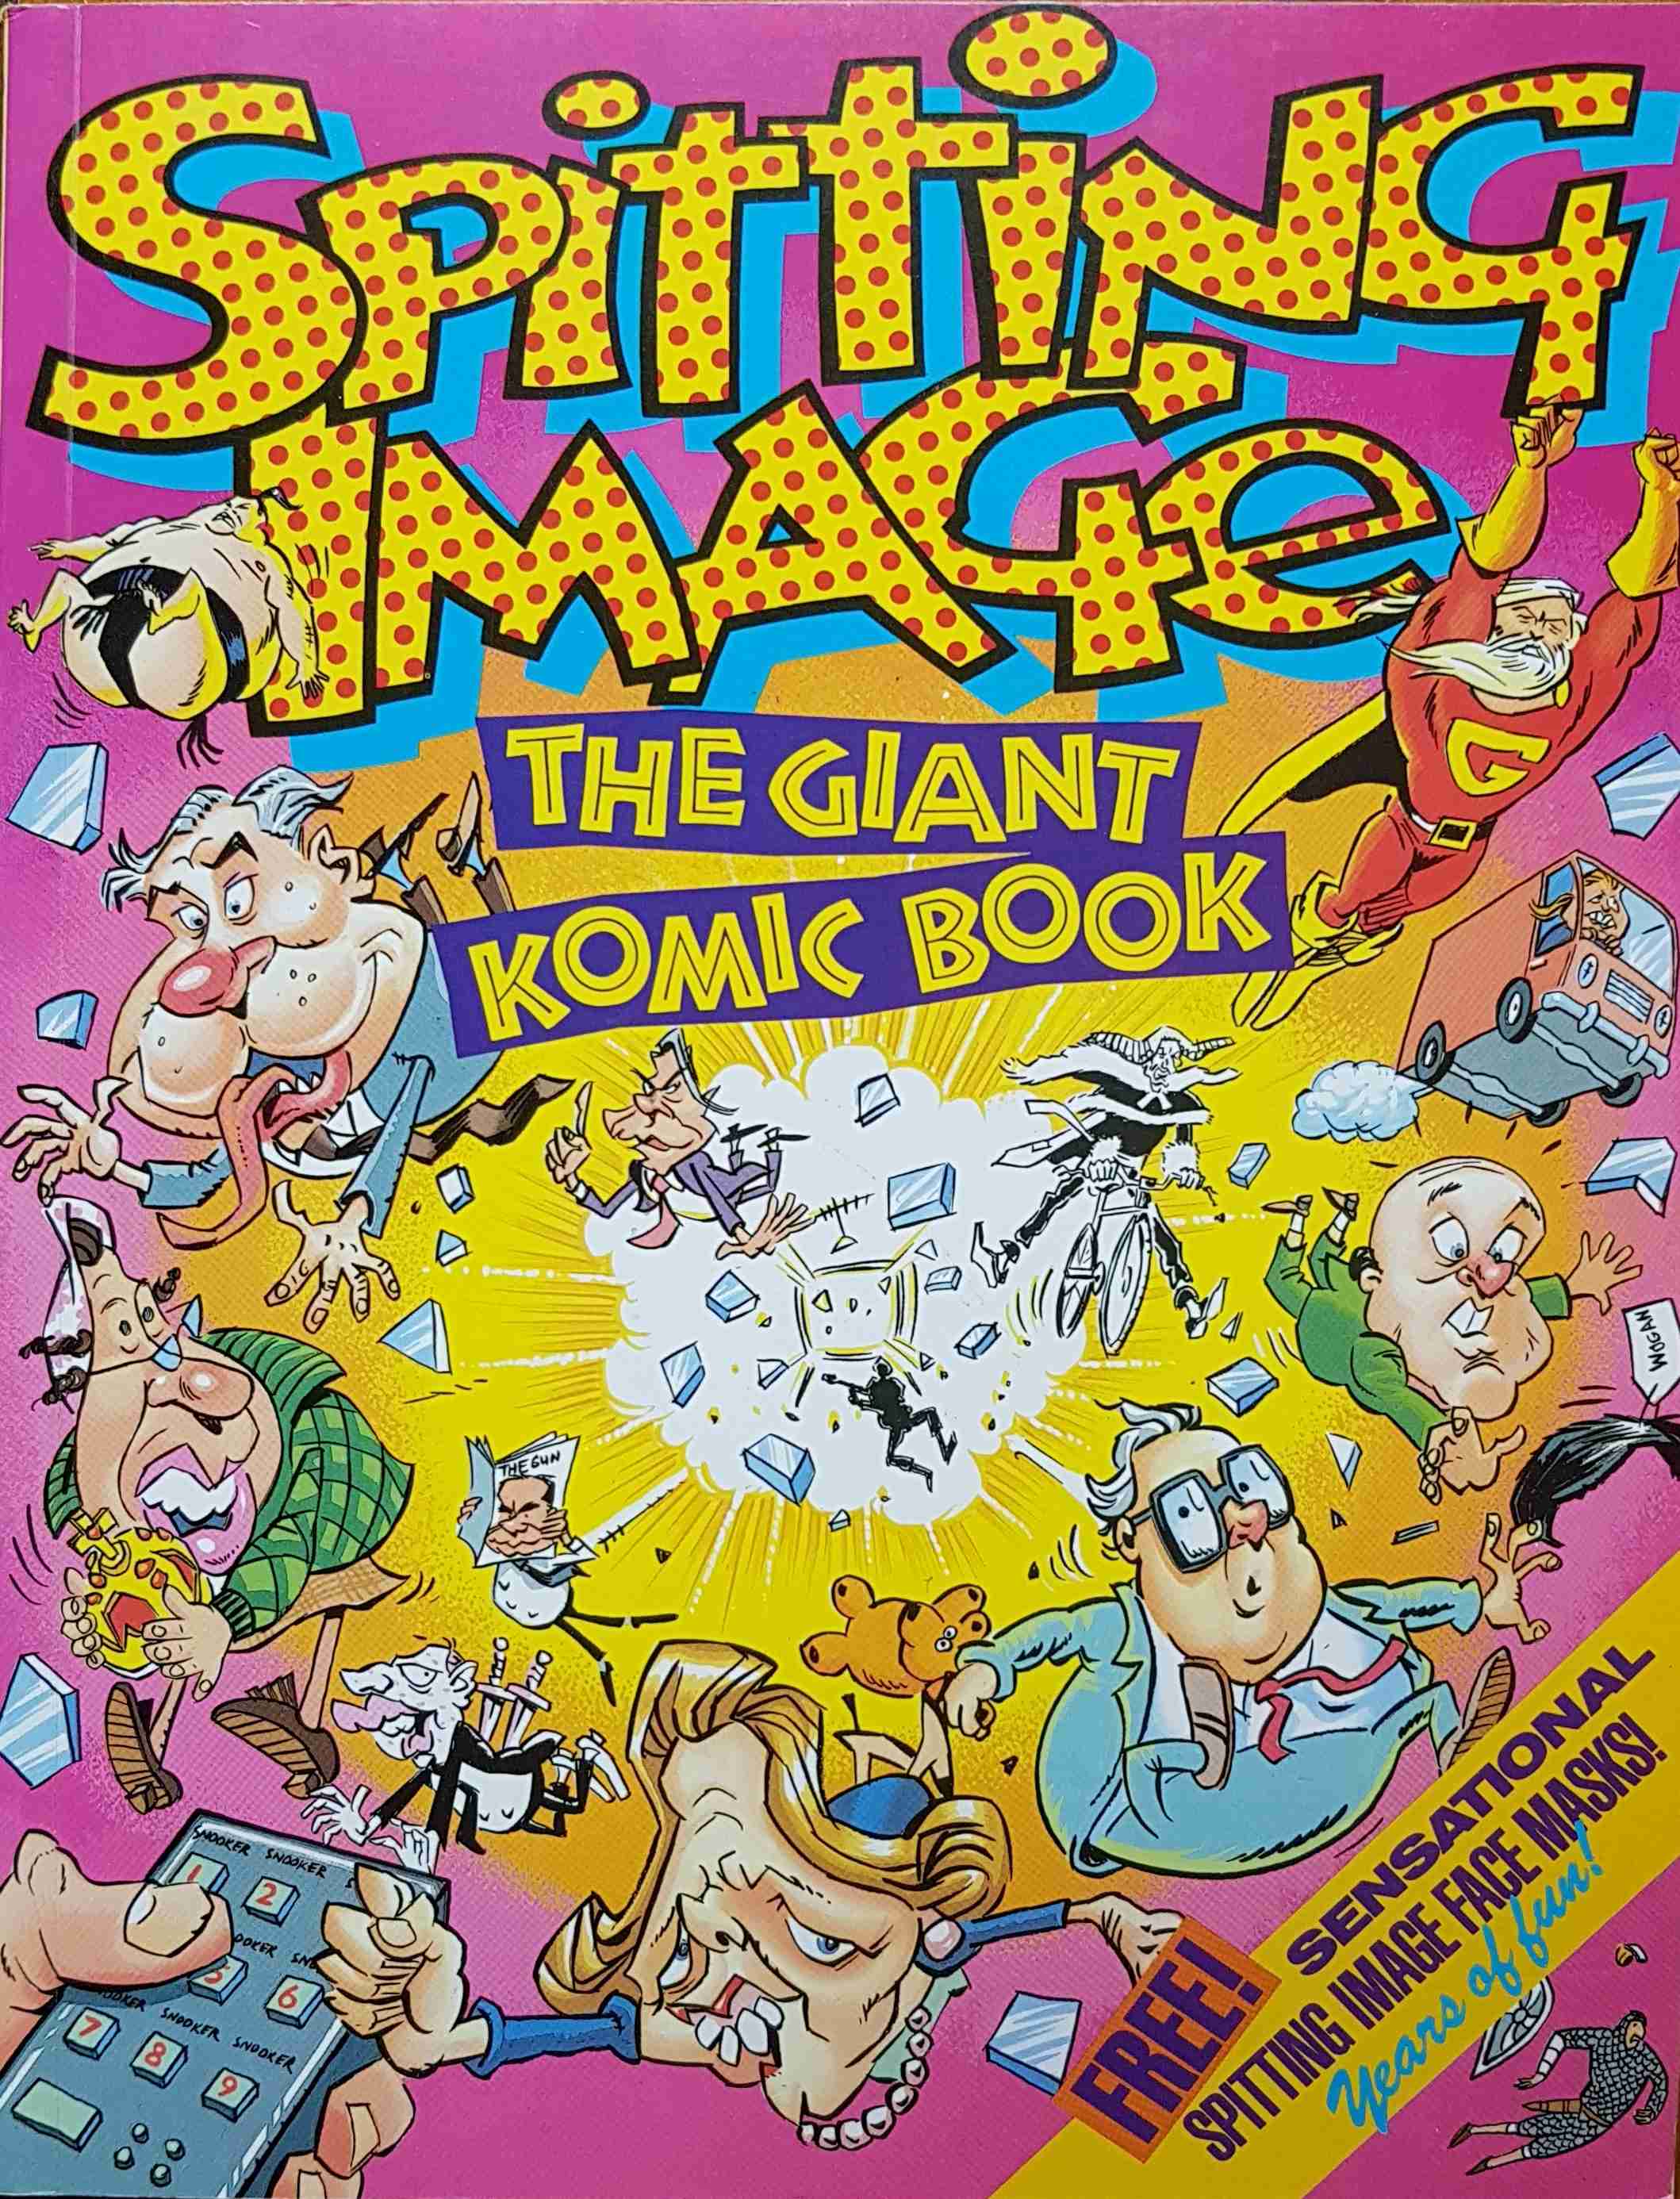 Picture of 1-871307-48-1 Spitting image - The giant komic book by artist Various from ITV, Channel 4 and Channel 5 books library